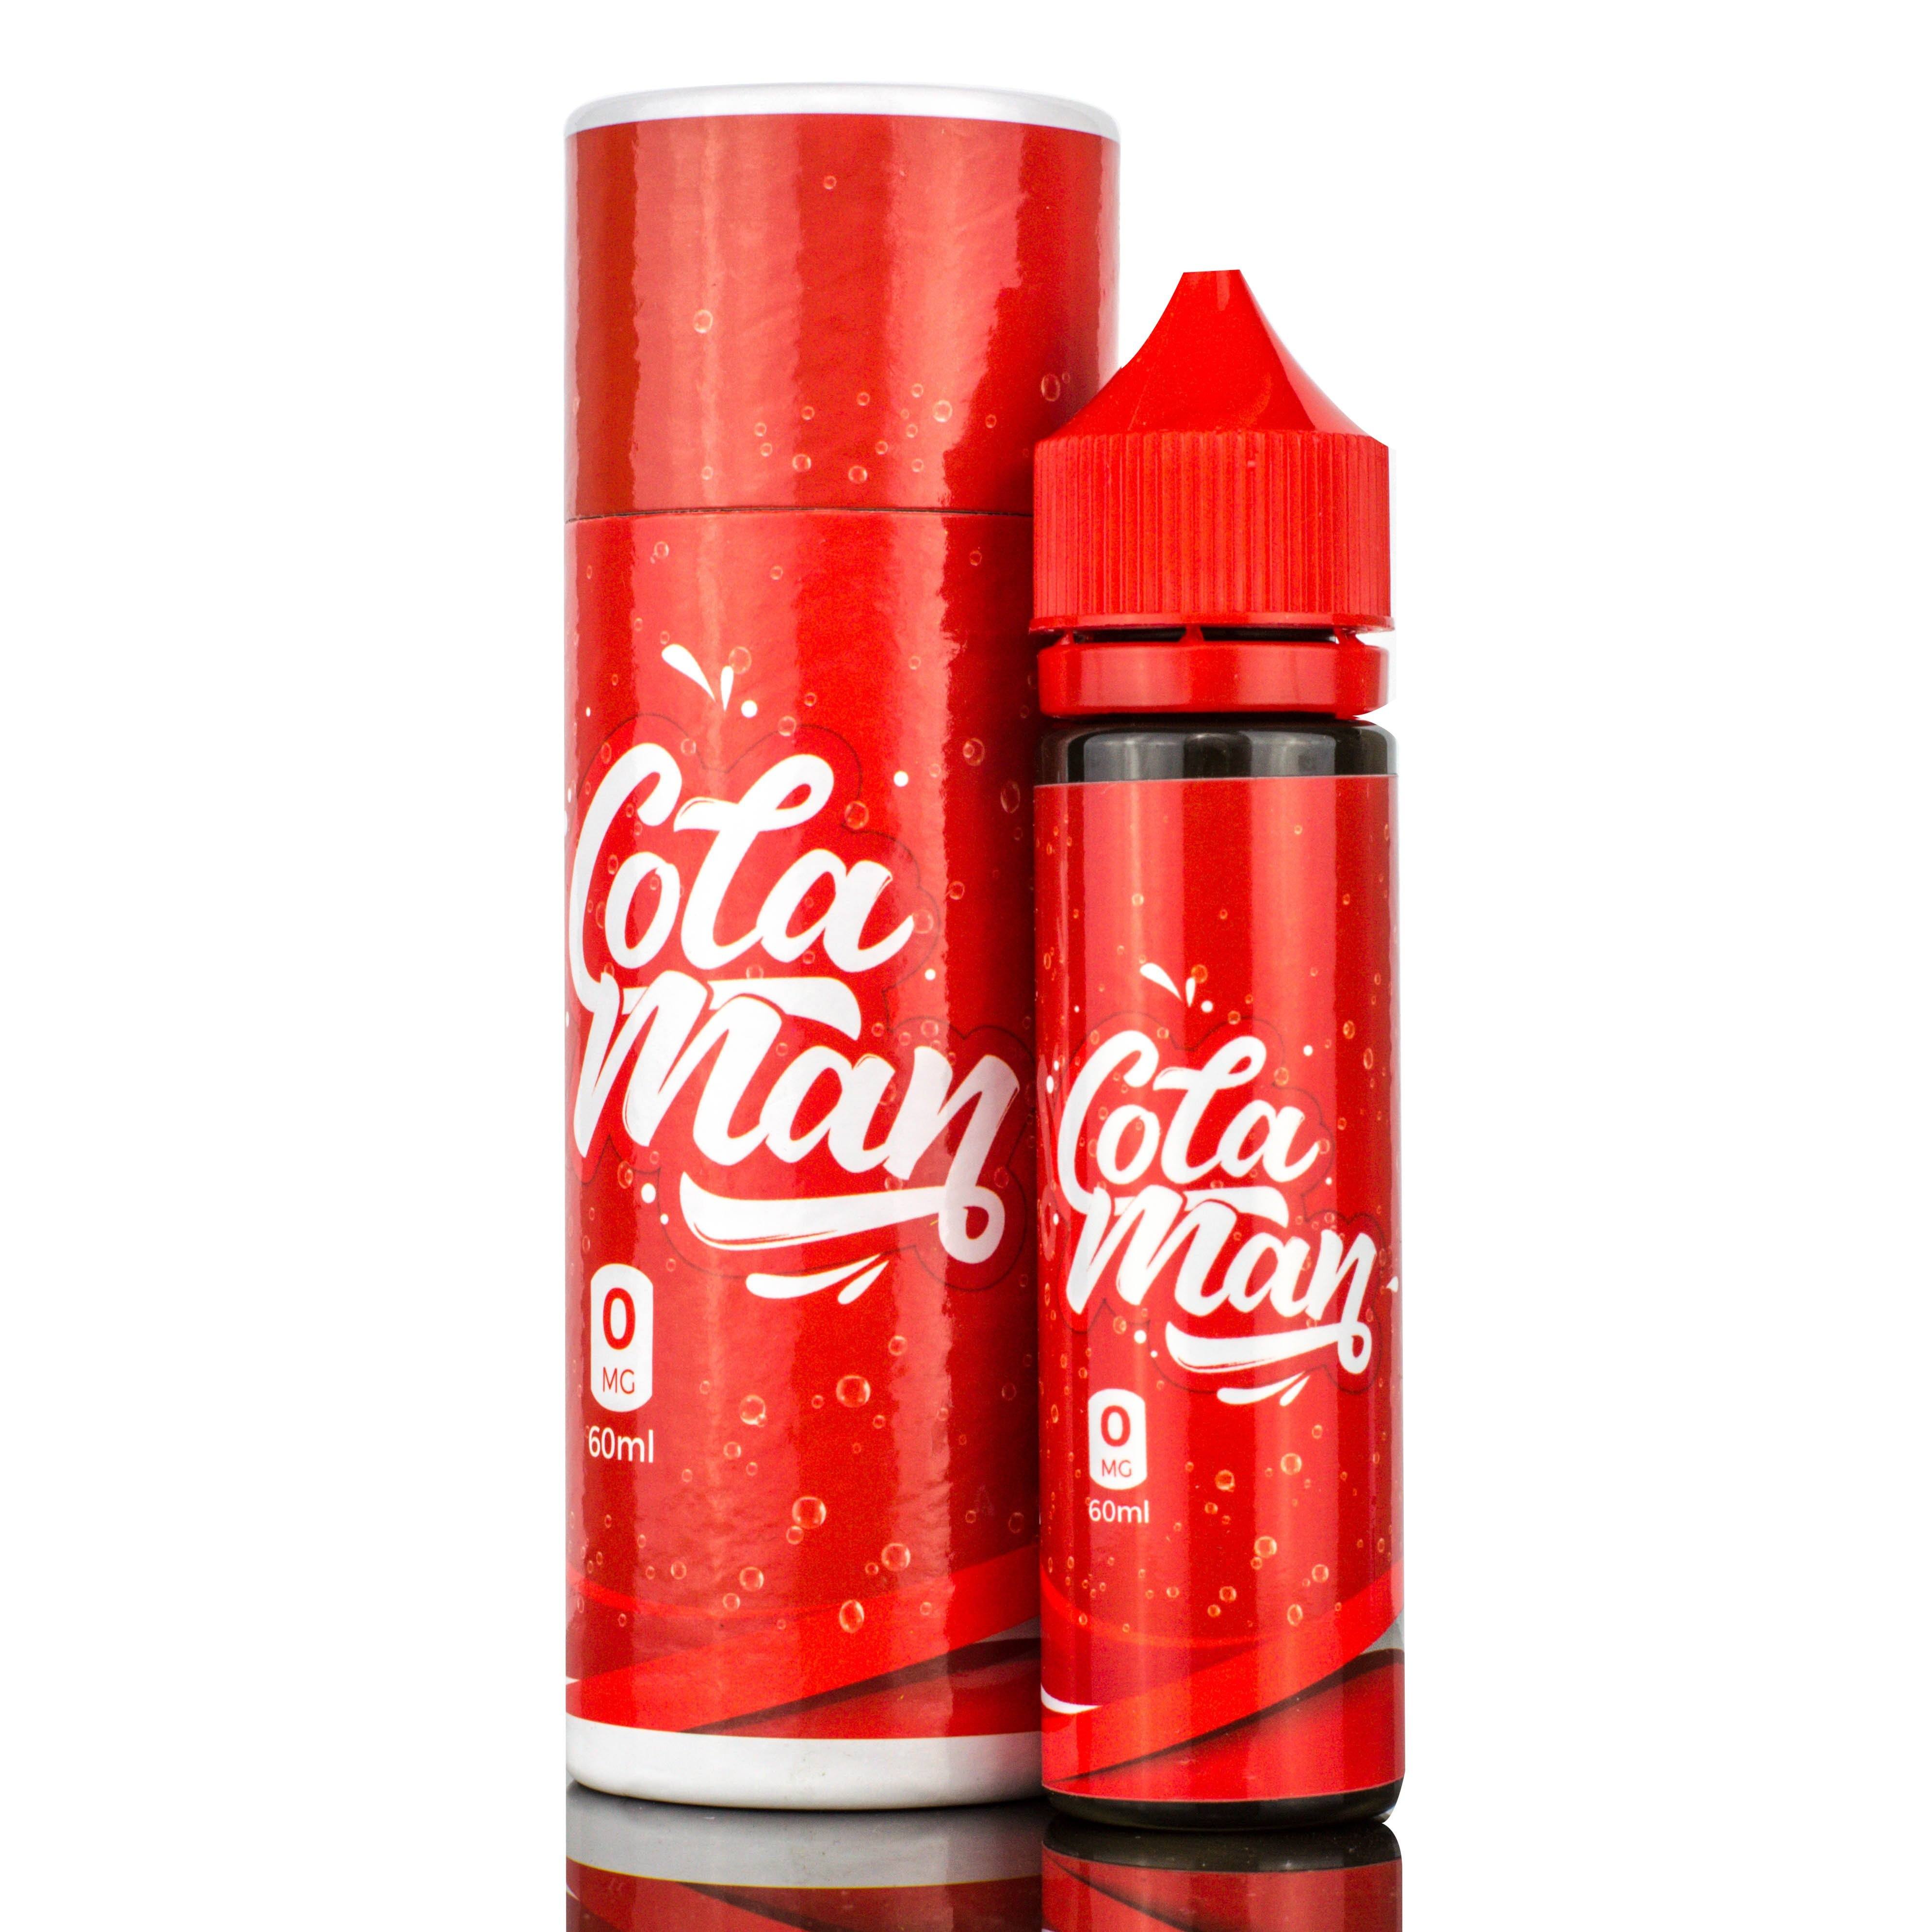 Cola Man by Cola Man Series 60mL with Packaging